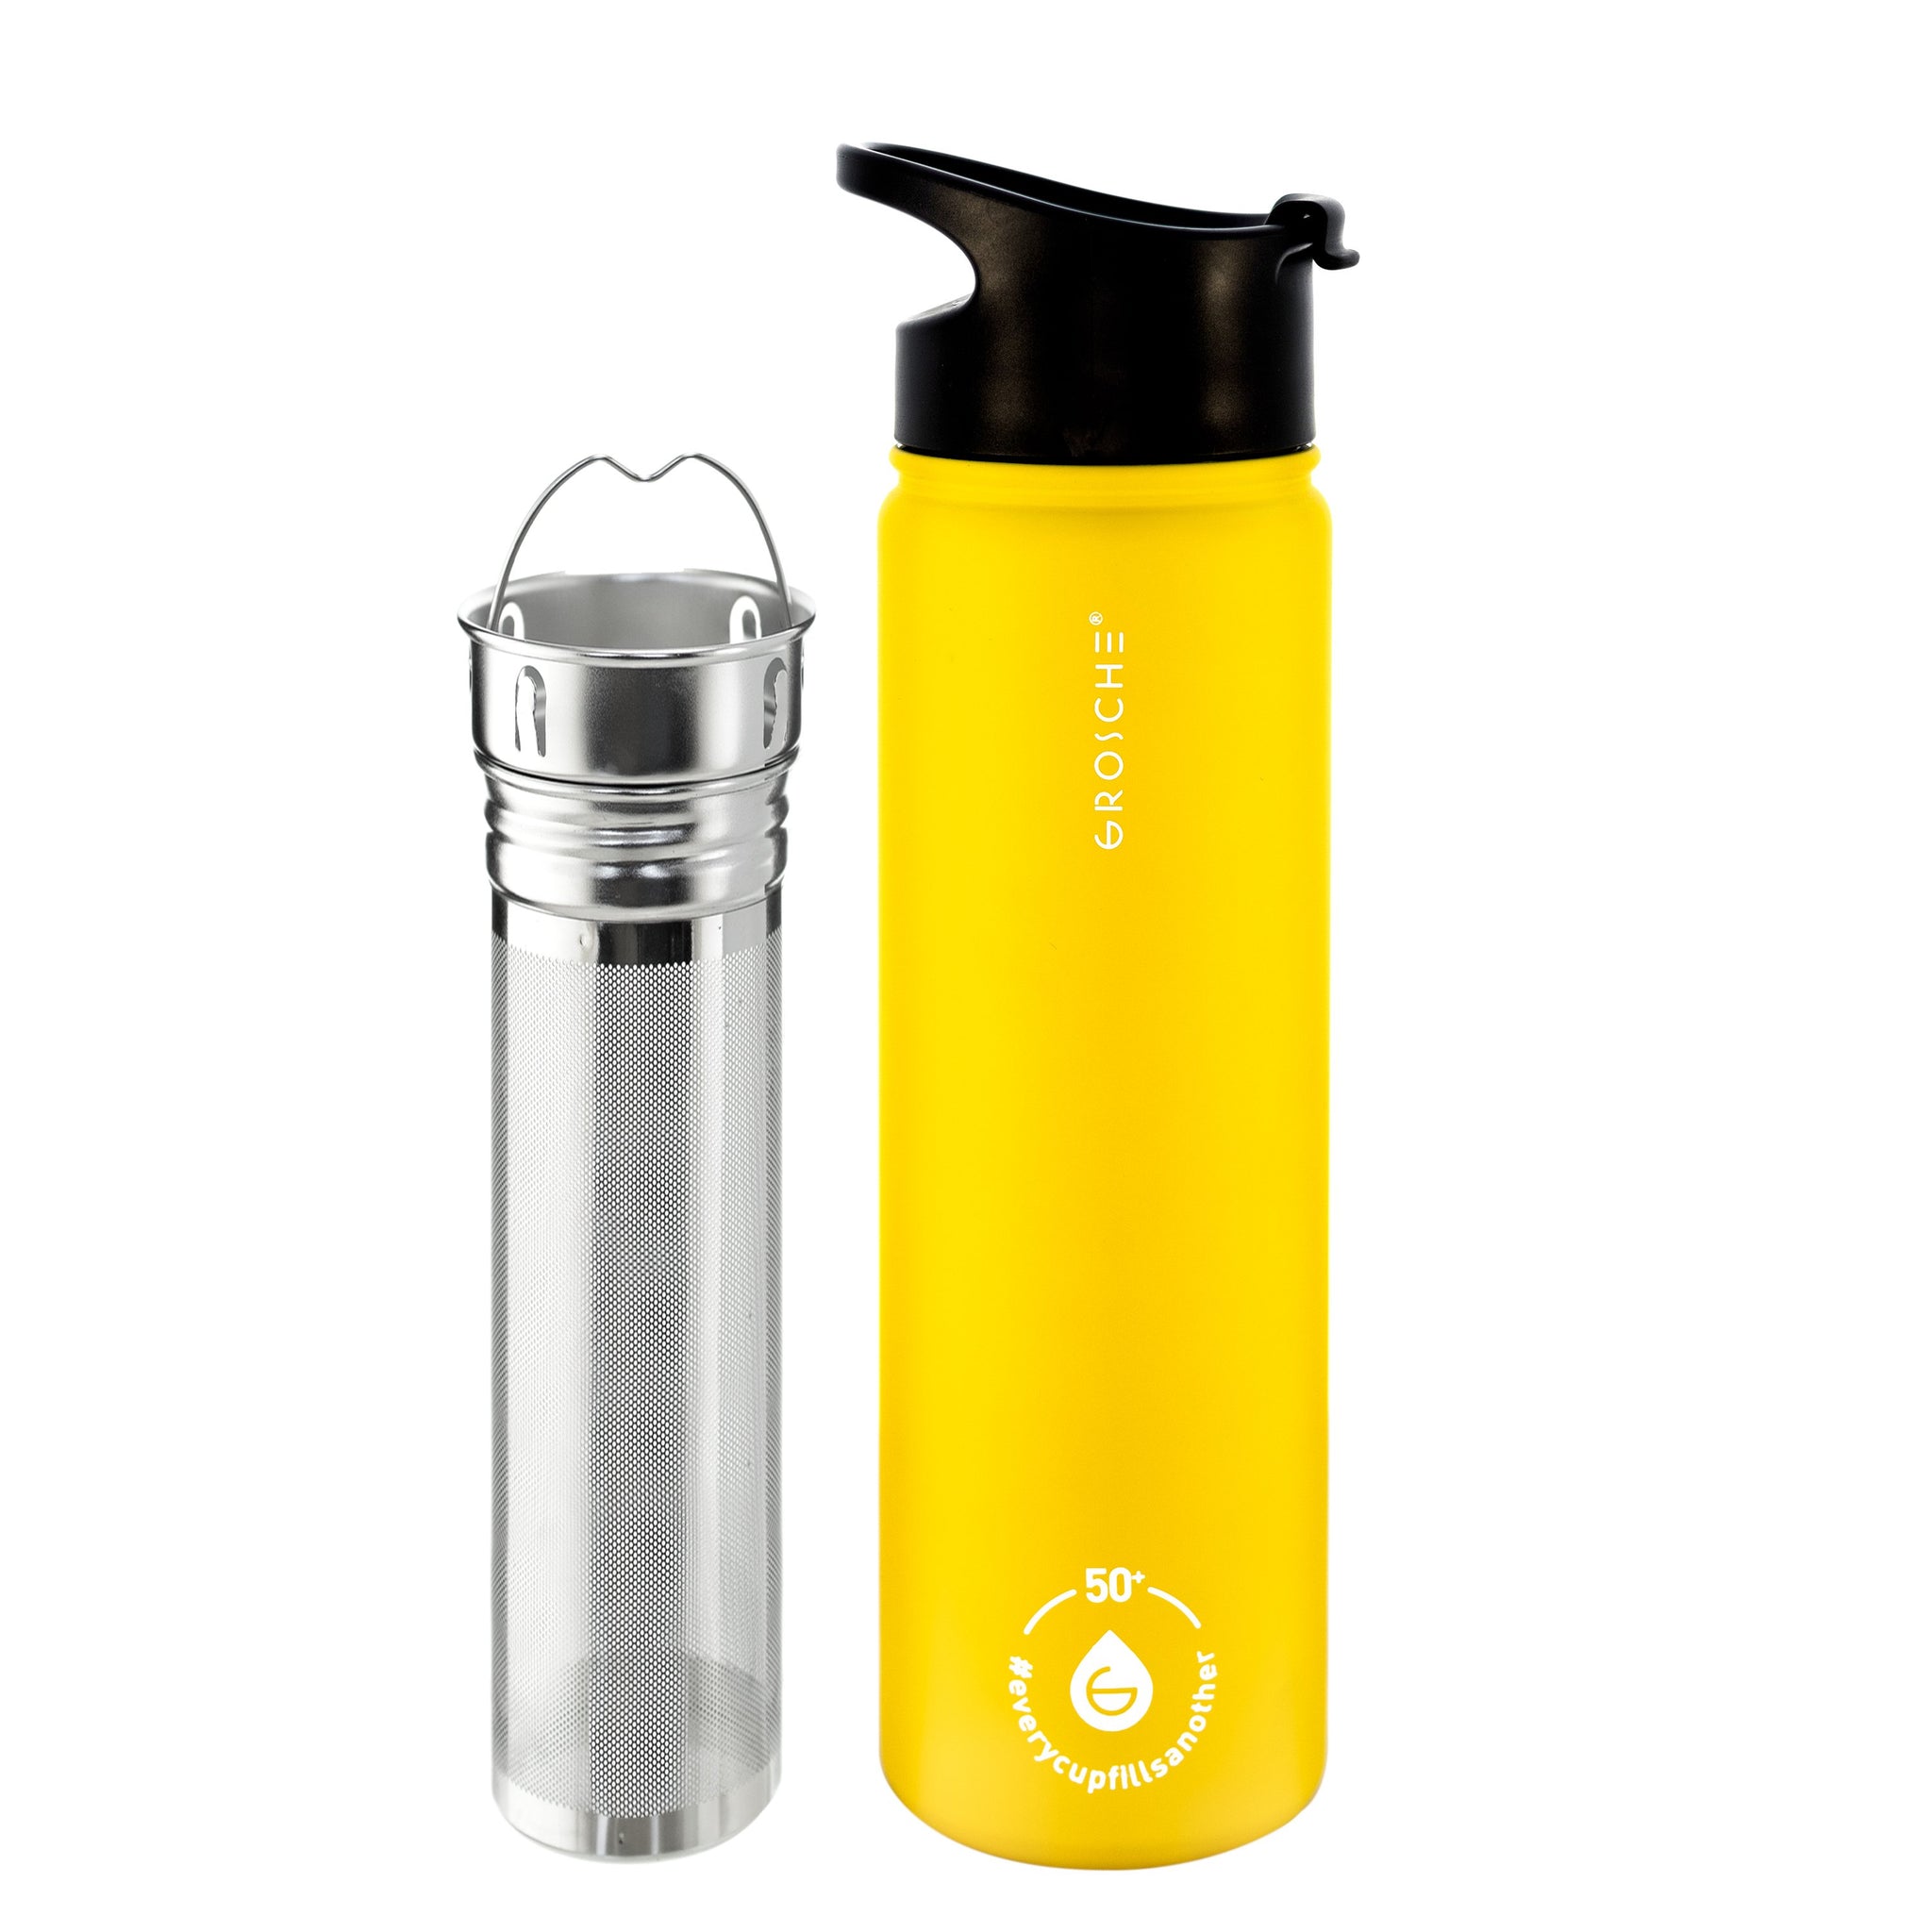 Grosche Chicago Steel Insulated Tea Infusion Flask, Tea And Coffee Tumbler,  22 Fl Oz Capacity - Honey Yellow : Target